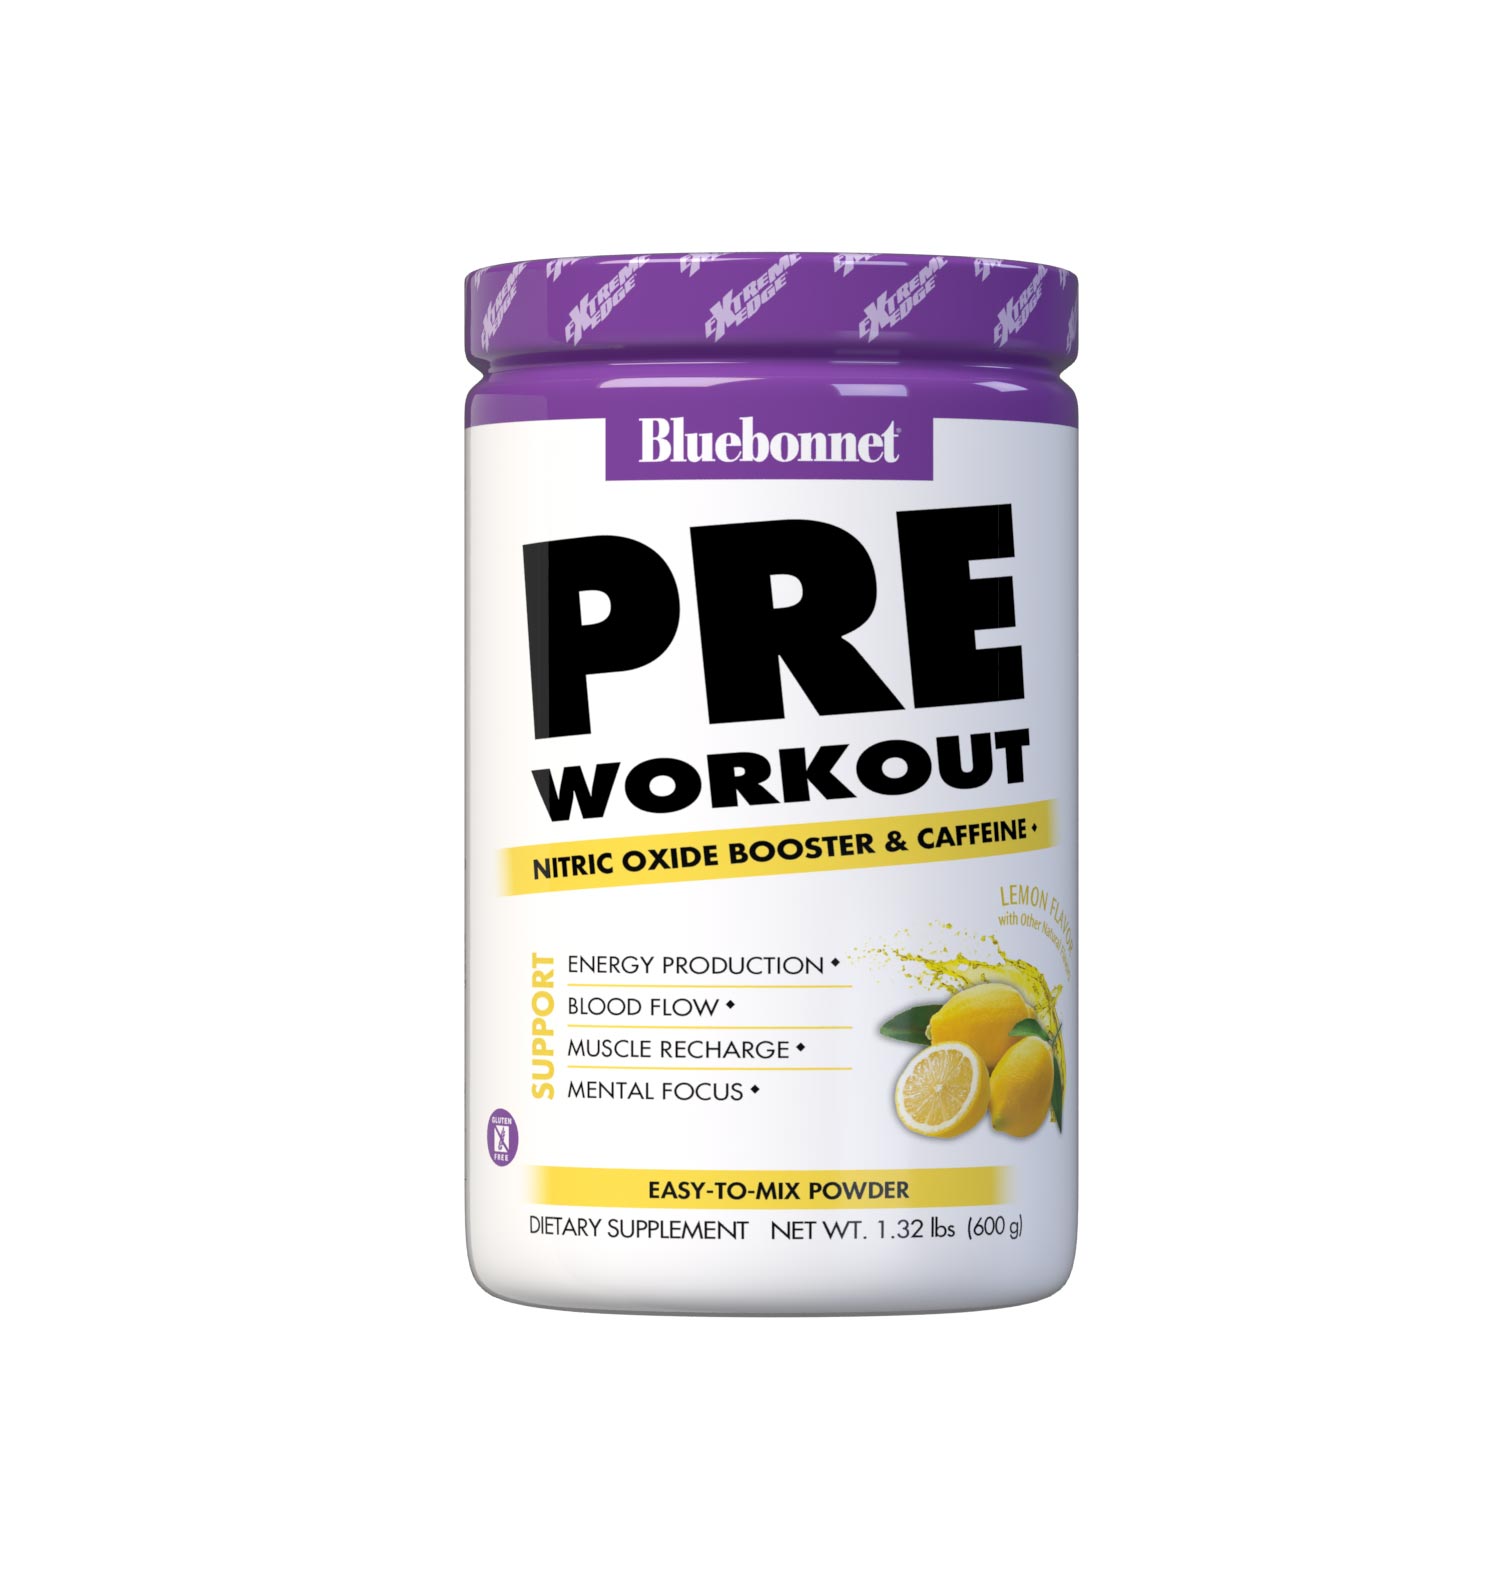 Bluebonnet's Lemon Flavored Pre Workout powder is designed to be one of the most comprehensive, muscle recharging formulas ever created. This triple-turbo, super-charged formula generates high energy, sharpens mental concentration, and increases nitric oxide (NO) levels for greater blood flow and intense muscle pumps. #size_1.32 lb